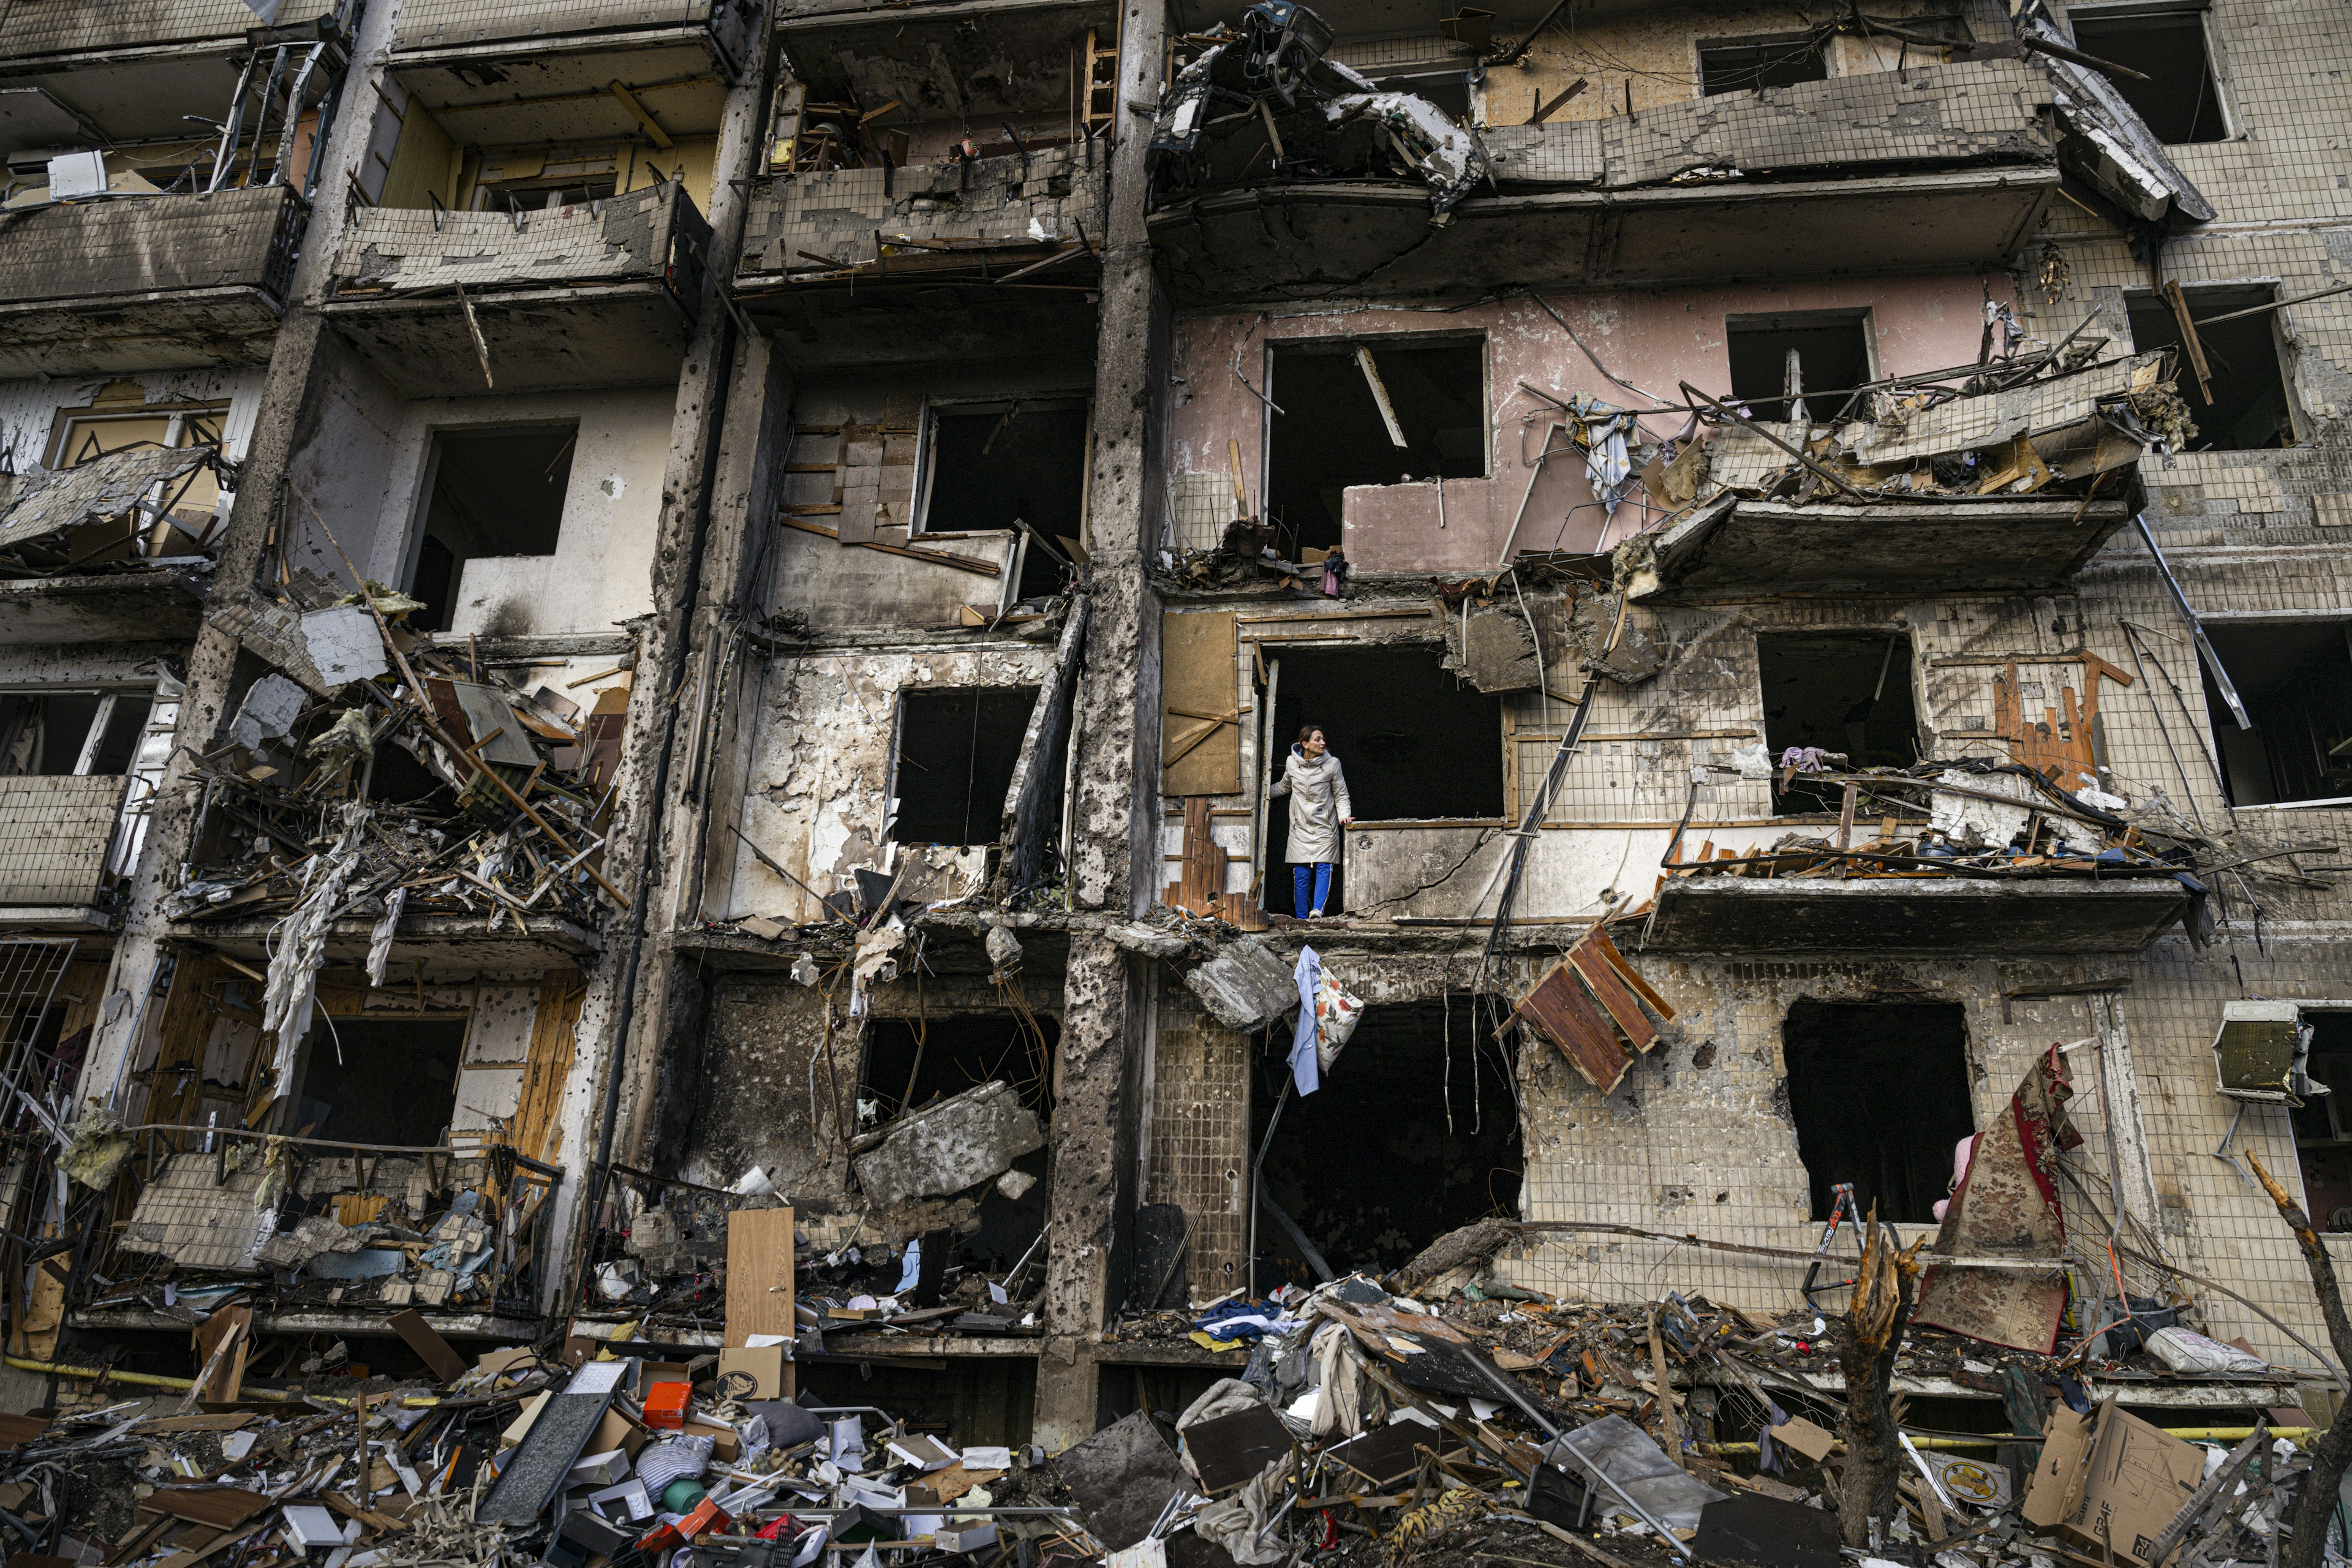 A woman surveys damage to a residential building that was destroyed by missiles in south Kyiv on February 25, 2022.